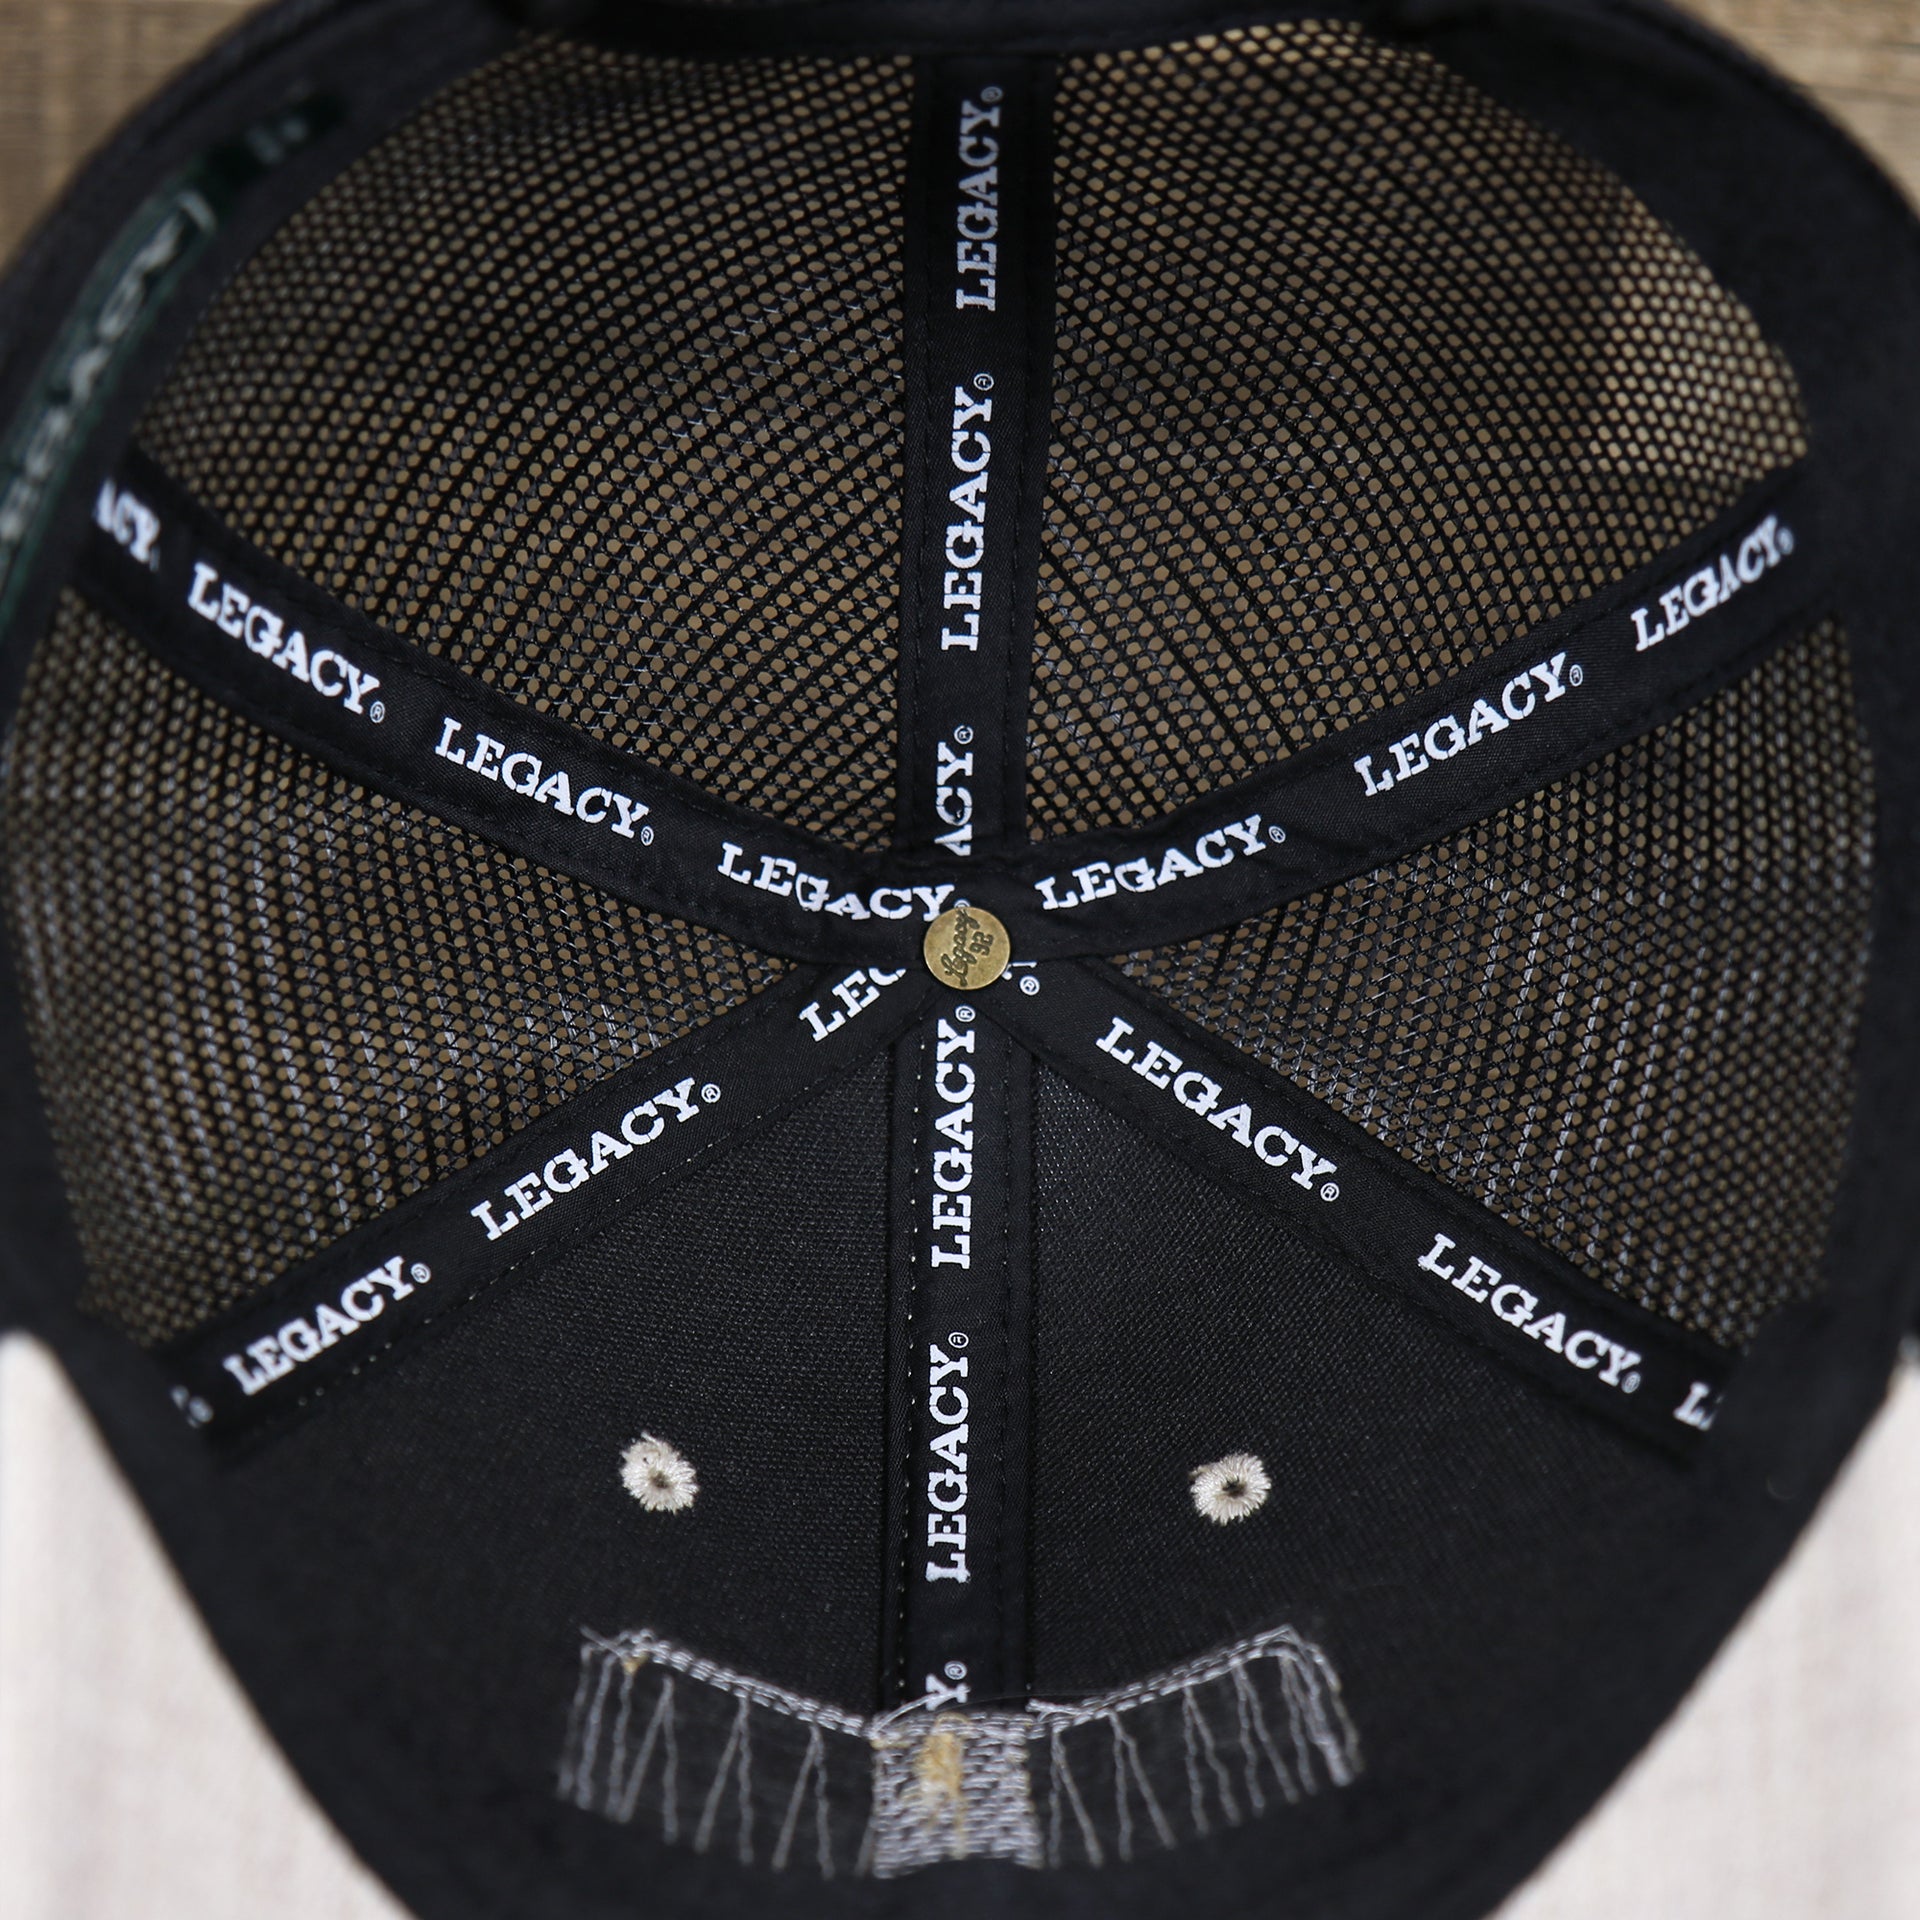 The inside of the New Jersey Ocean City Sunset Mesh Back Trucker Hat | Heather Tan And Black Mesh Trucker Hat